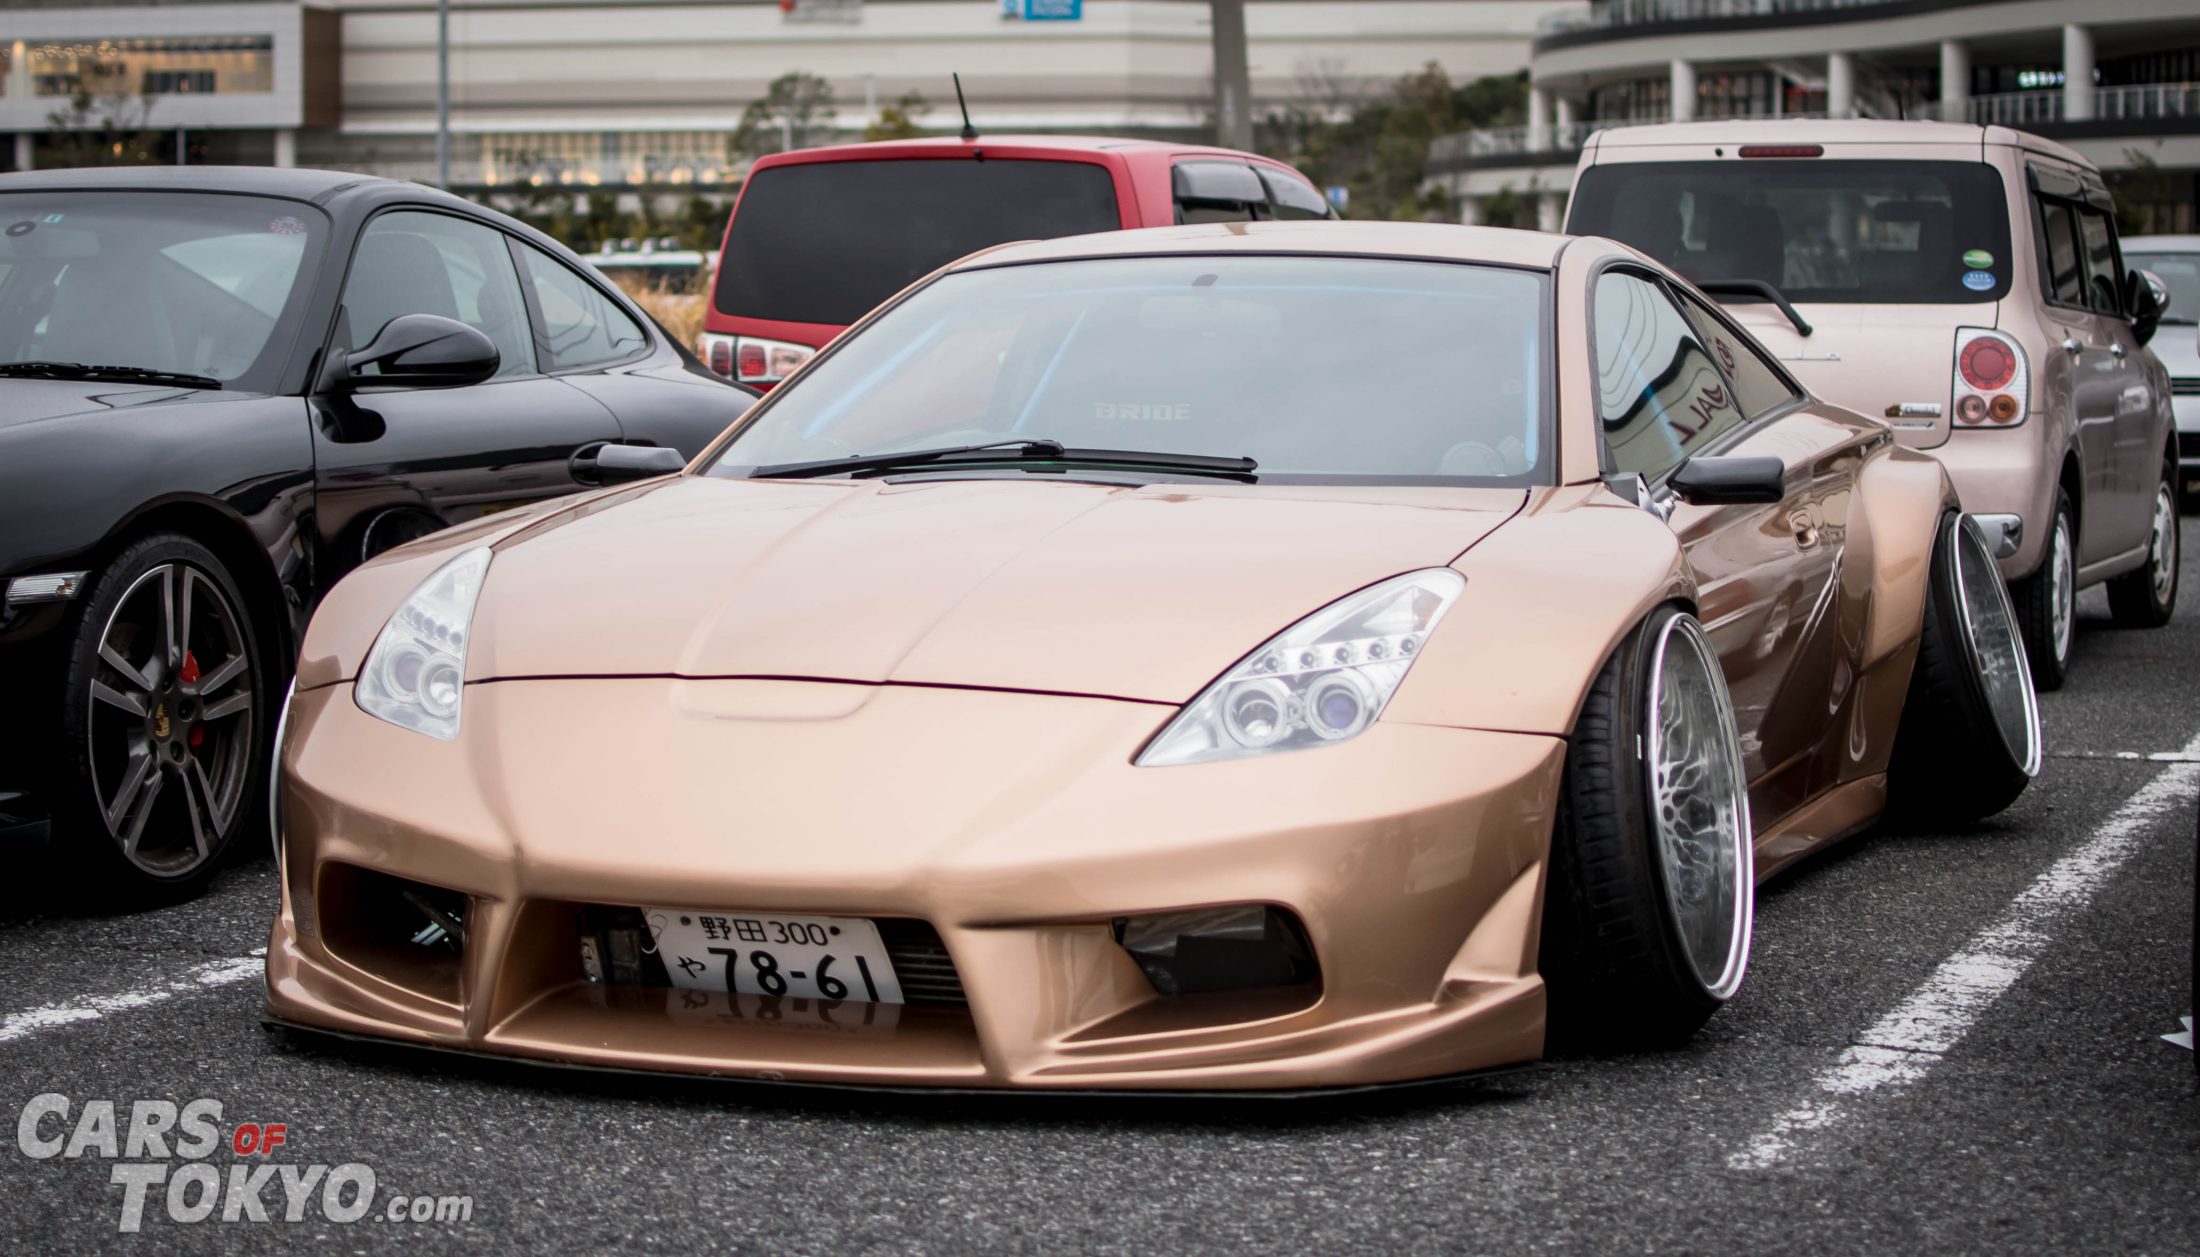 cars-of-tokyo-modified-toyota-celica